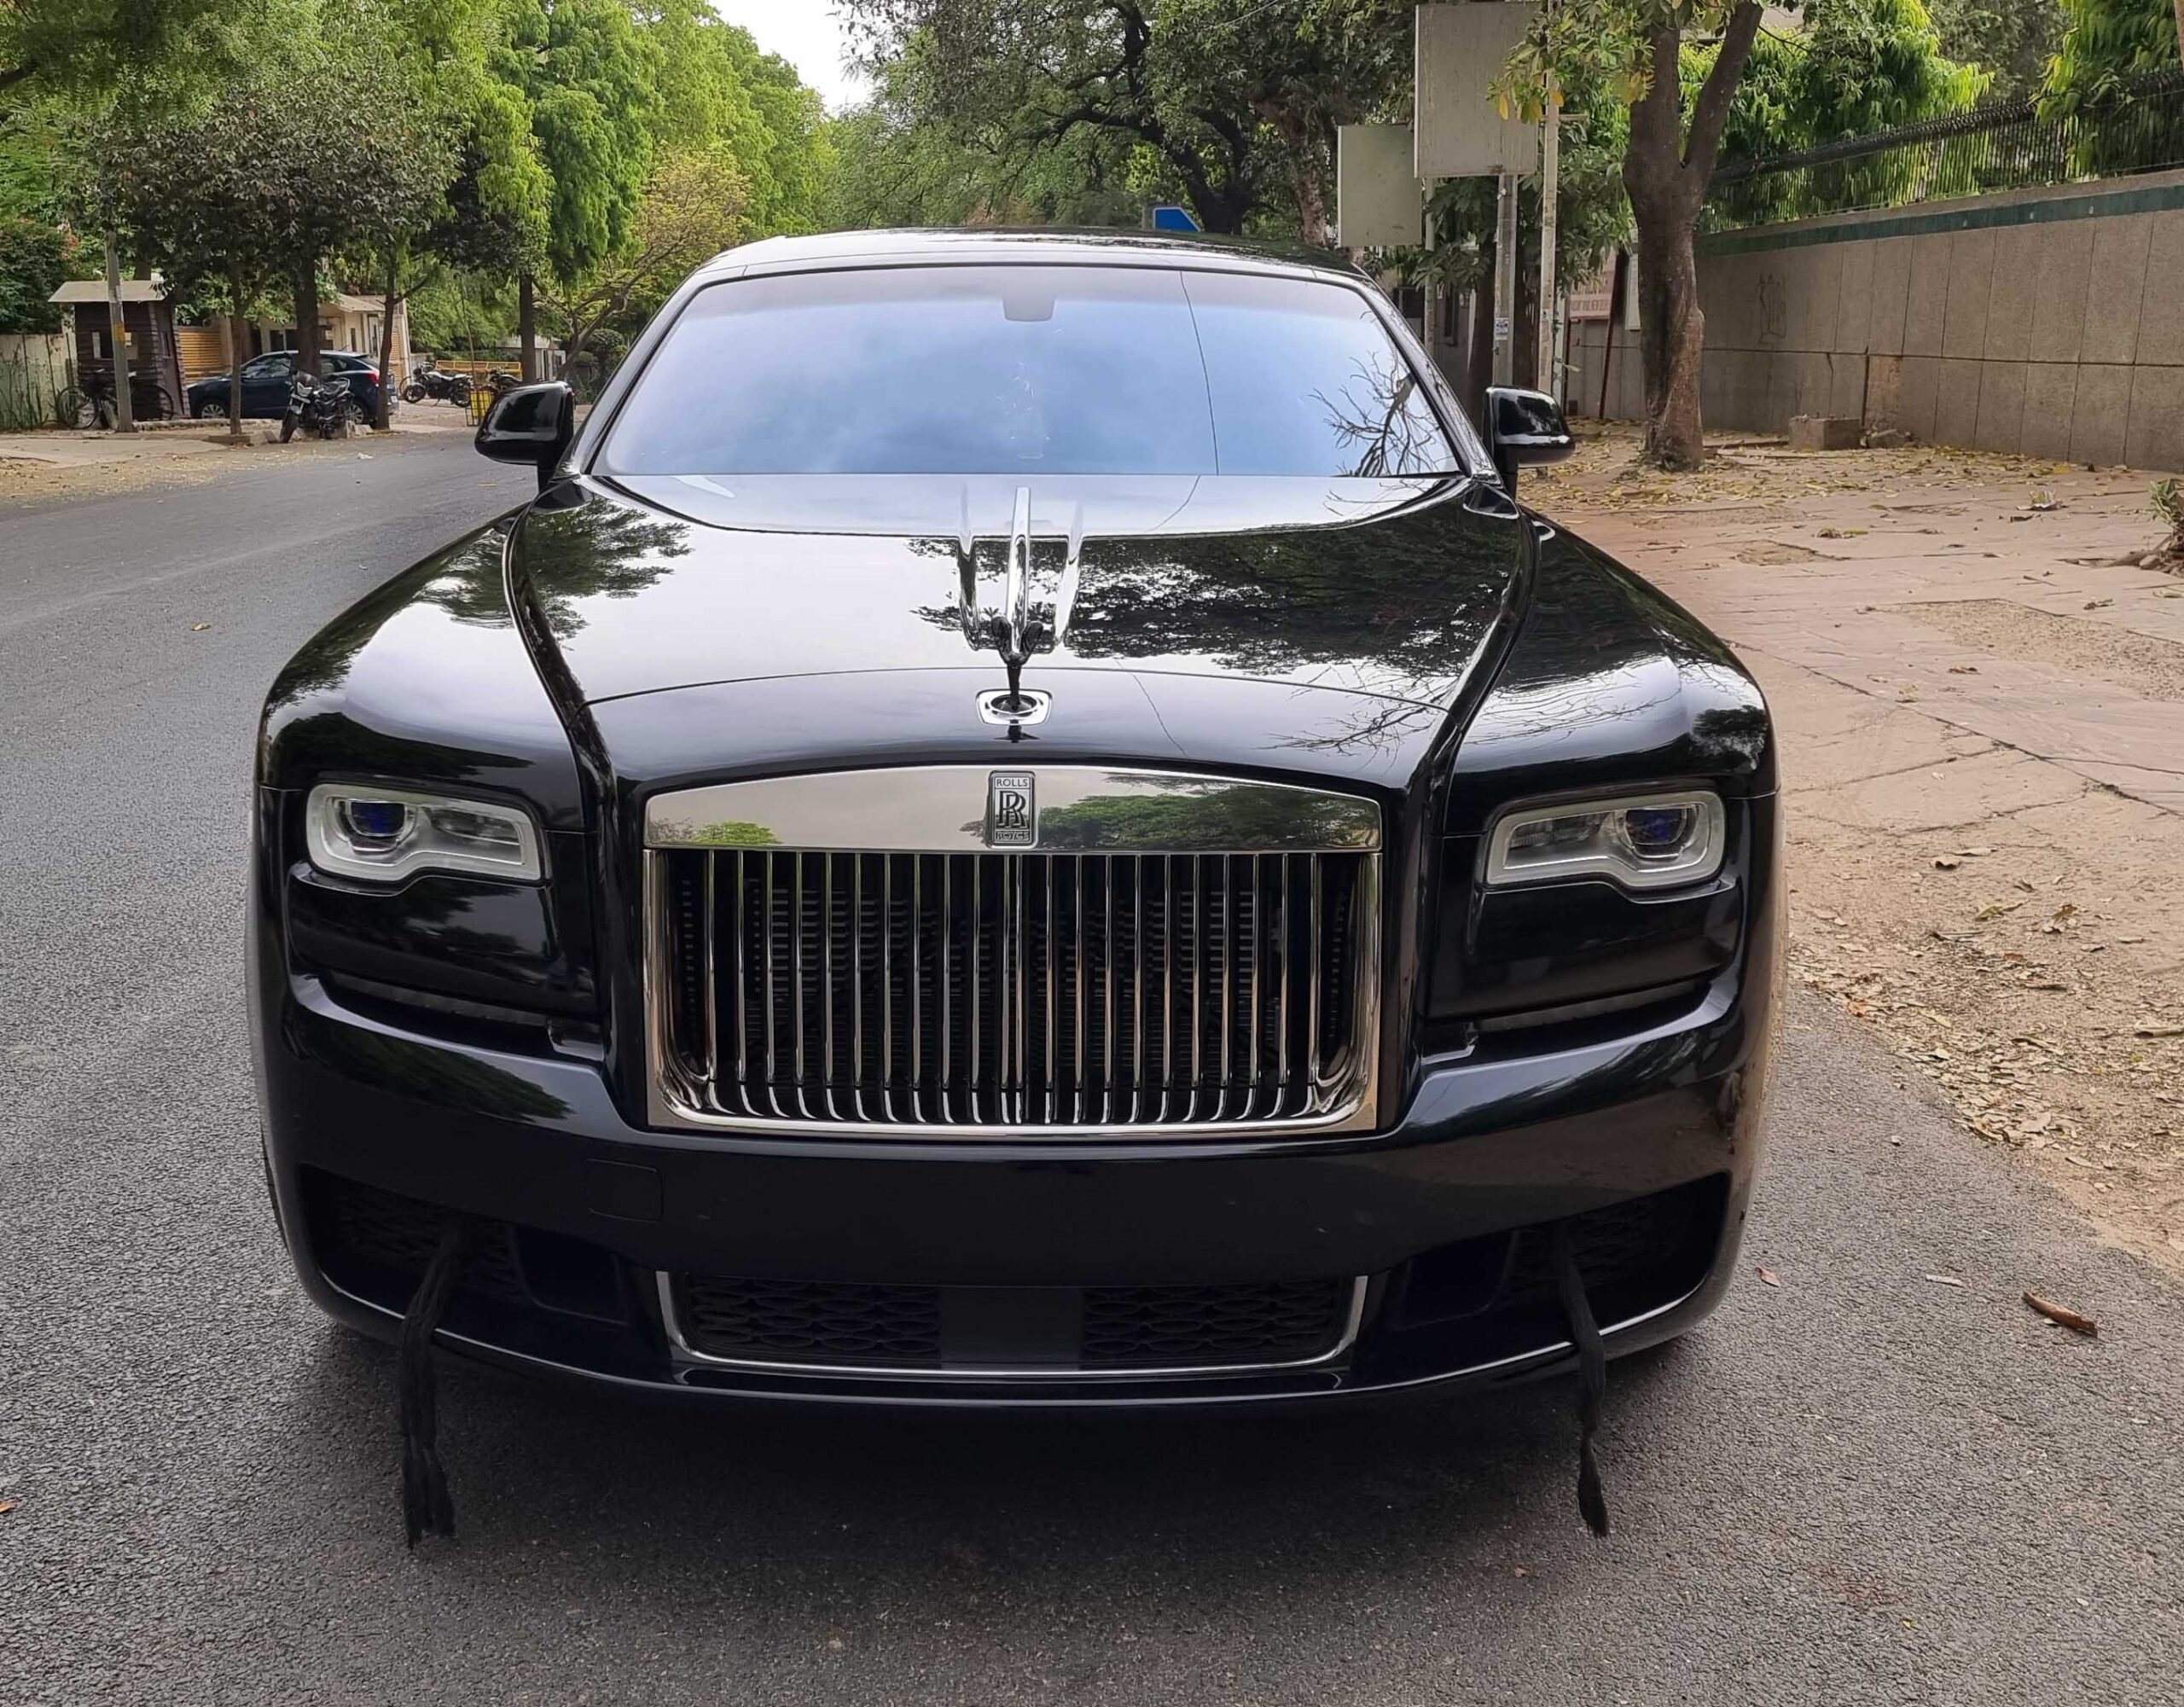 New Rolls Royce Ghost crashes into a Mumbai footpath during first drive